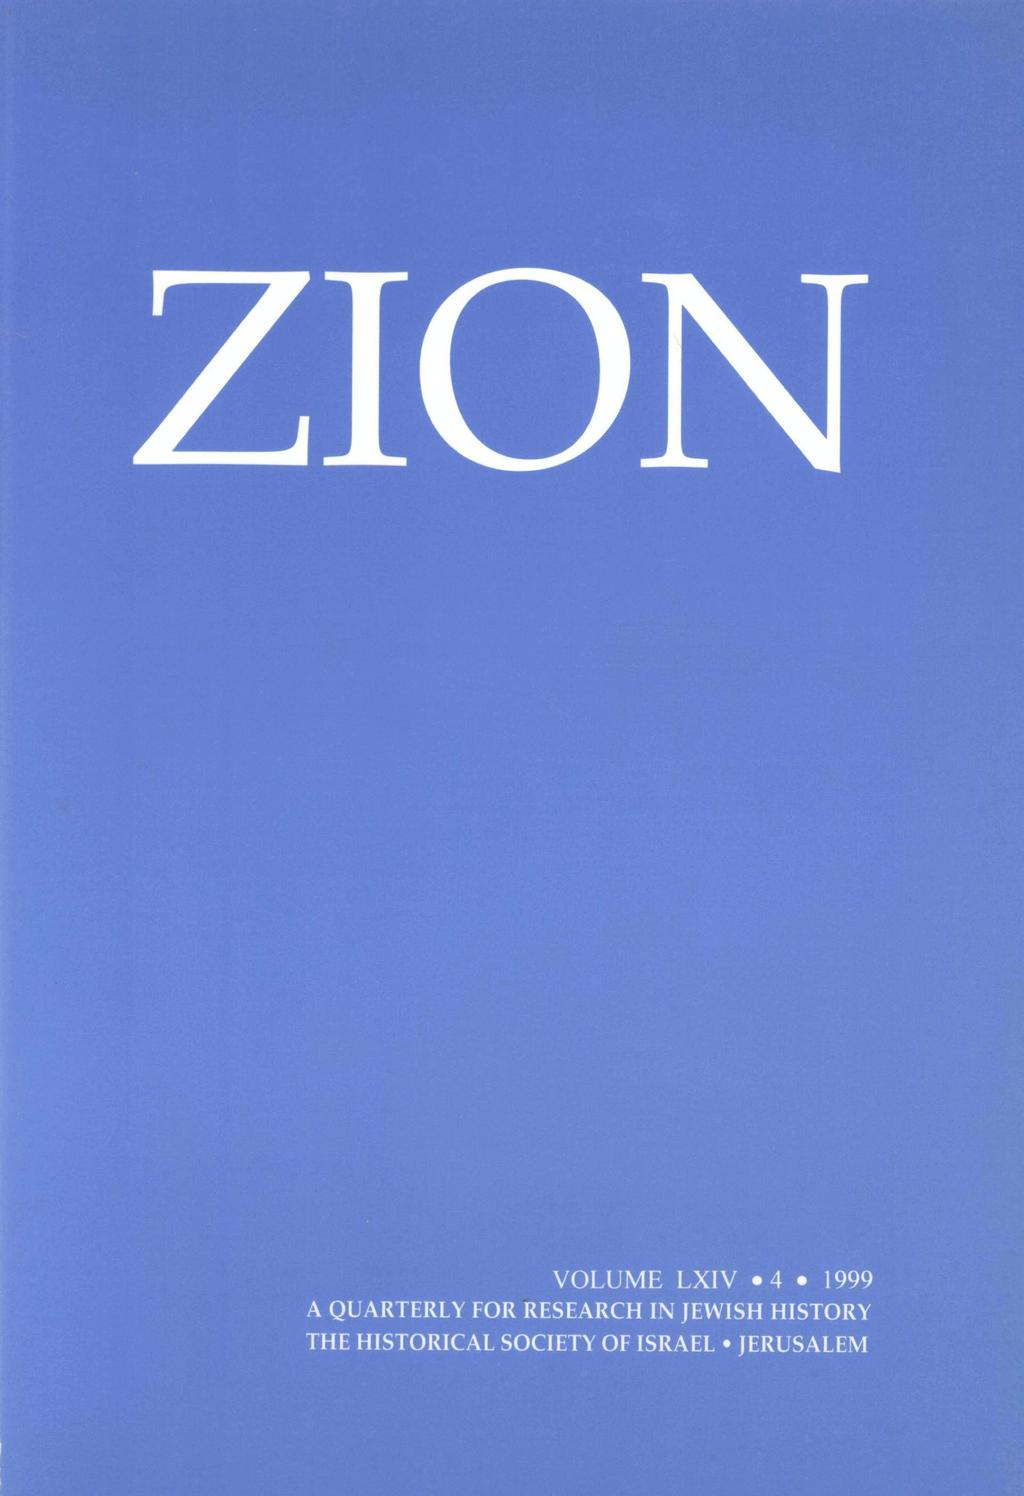 ZION VOLUME LXIV %4 1999 A QUARTERLY FOR RESEARCH IN